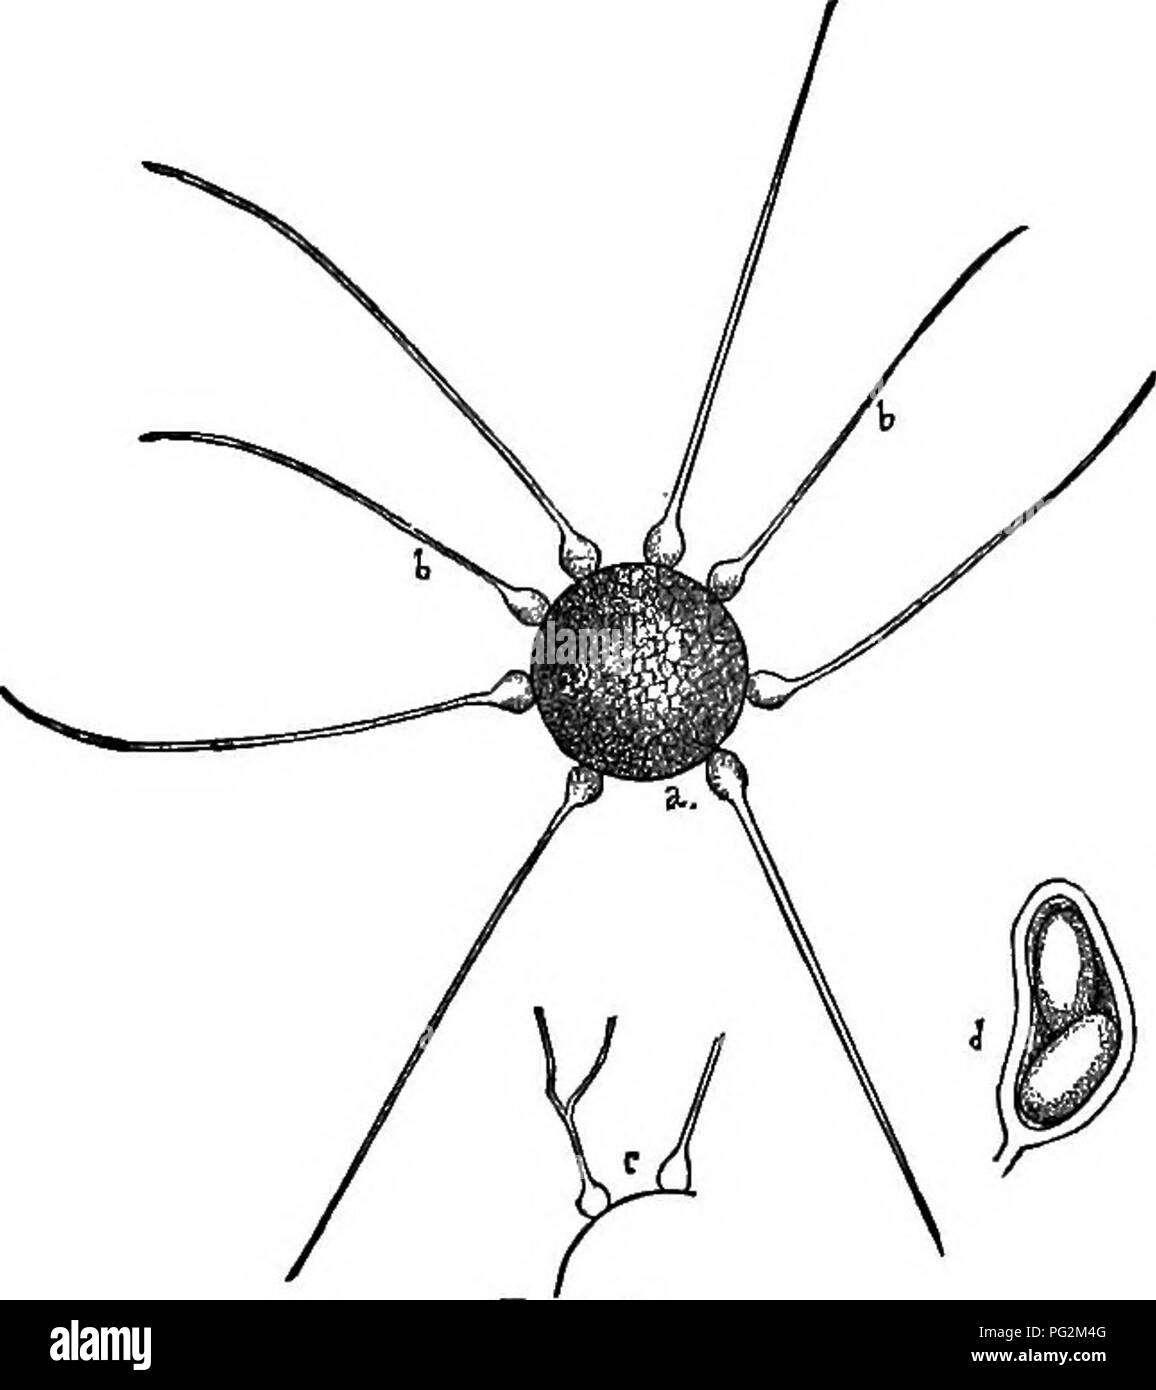 . Parasitic fungi of Illinois / by T.J. Burrill. Fungi. Fig. 5. Figure 5. Undnula am- lis, Peck: a, perithe- cium with the numerous appendages (6) coiled at the tip,— magnified 100 times; c, i one of the appendages (tip) further magnified; d,anas- cus with five spores,—magni- fied 200 times. The lower, pointed end of the ascus is attached to the bottom of the cavity of the perithecium.. Figure 6. Phyllactinia sw/- fulta, (Eeb.) Sacc.: a, perithe- cium with the needle-shaped appendages (6) swollen at base,—magnified 50 times; c, a branched appendage; d!, an ascus with two spores,— mag- nified 1 Stock Photo